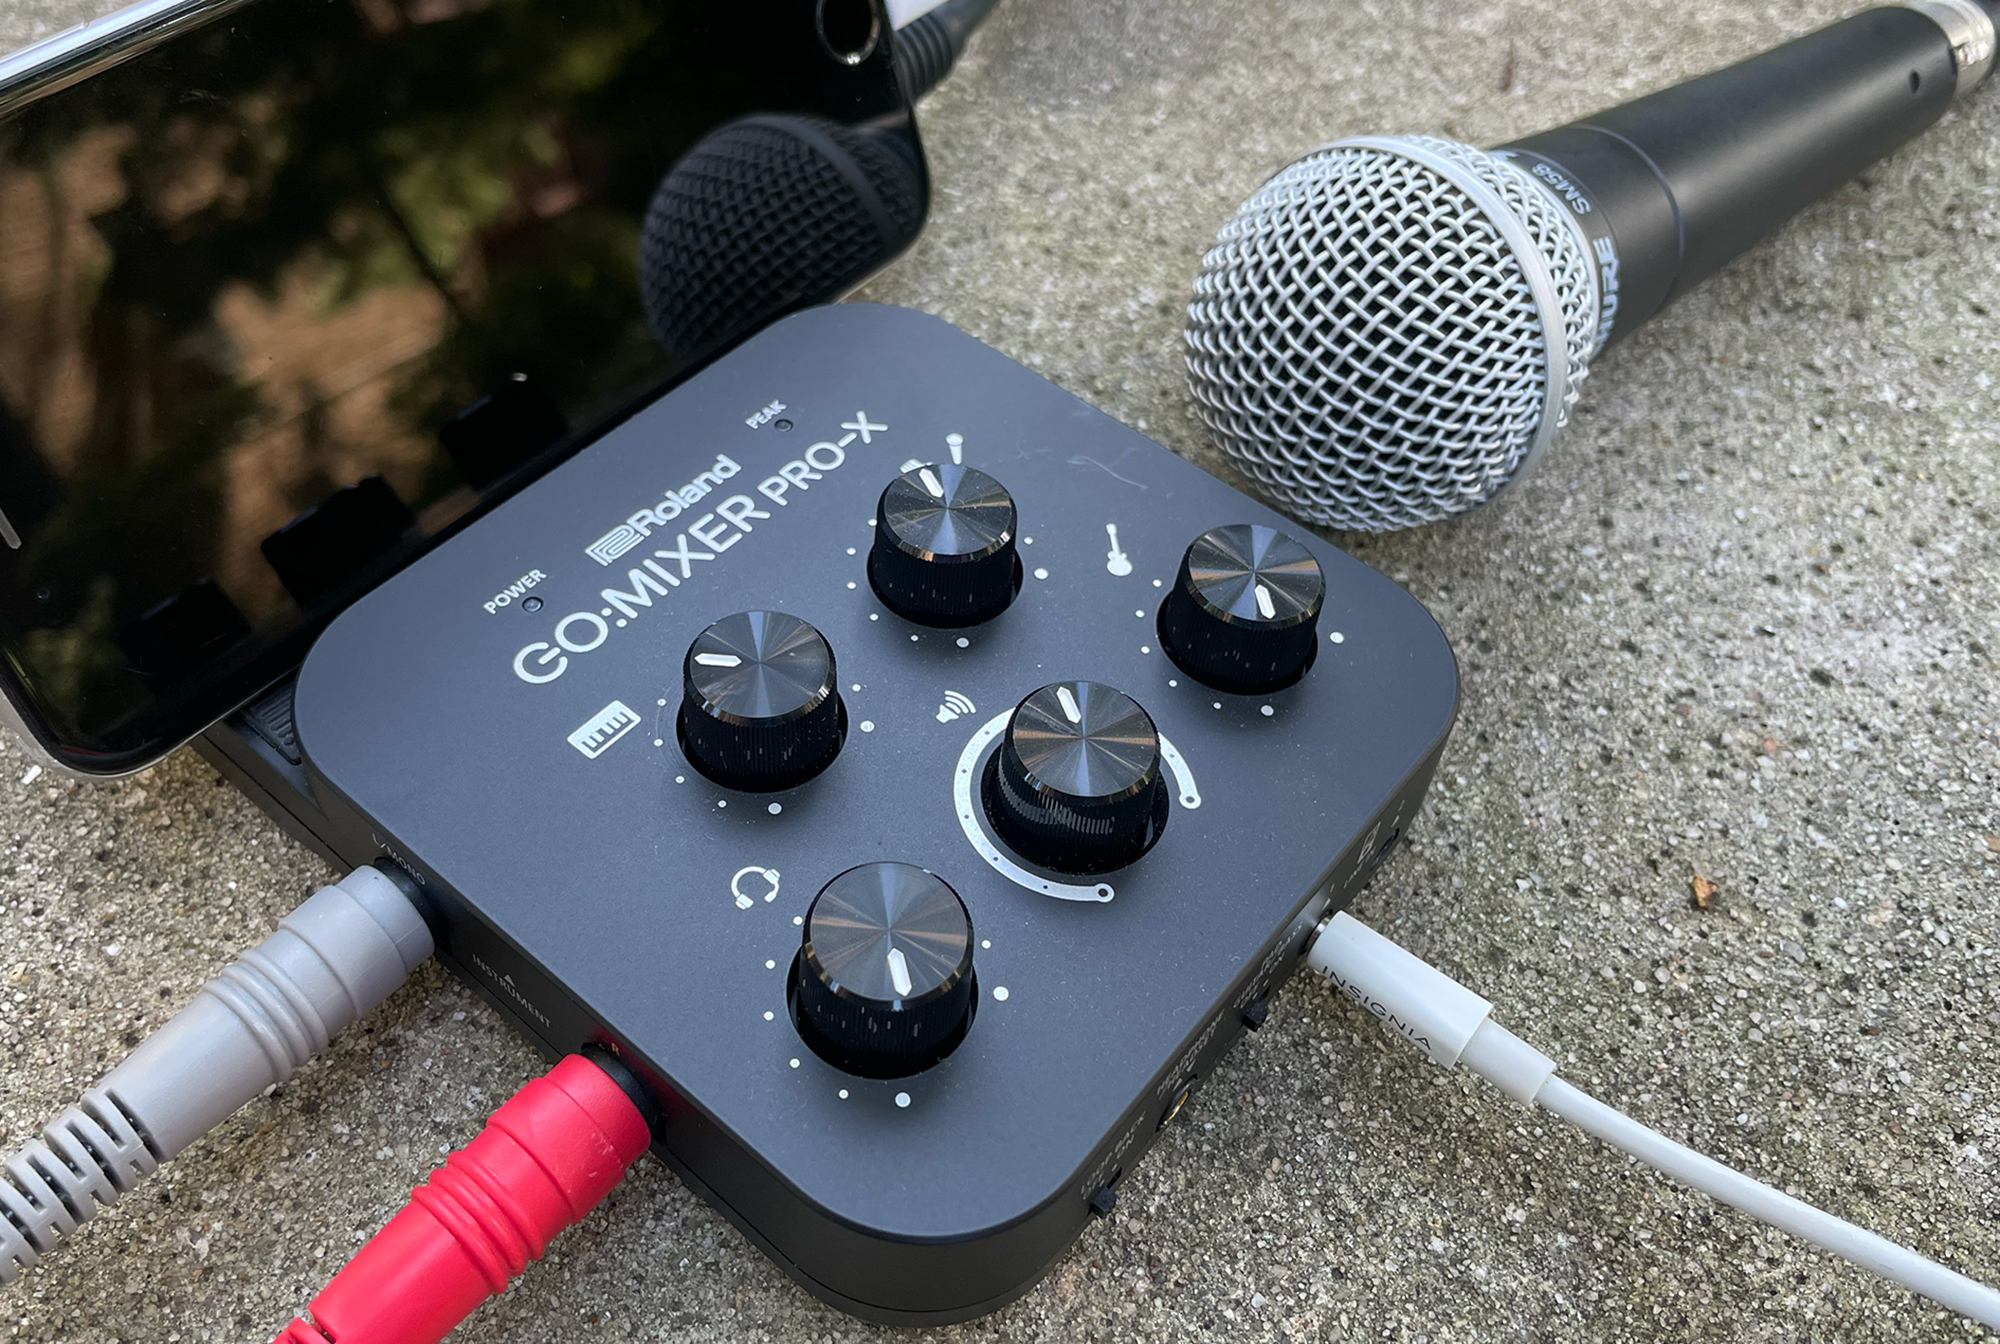 Roland GO:MIXER review: A mighty mini mixer | Science